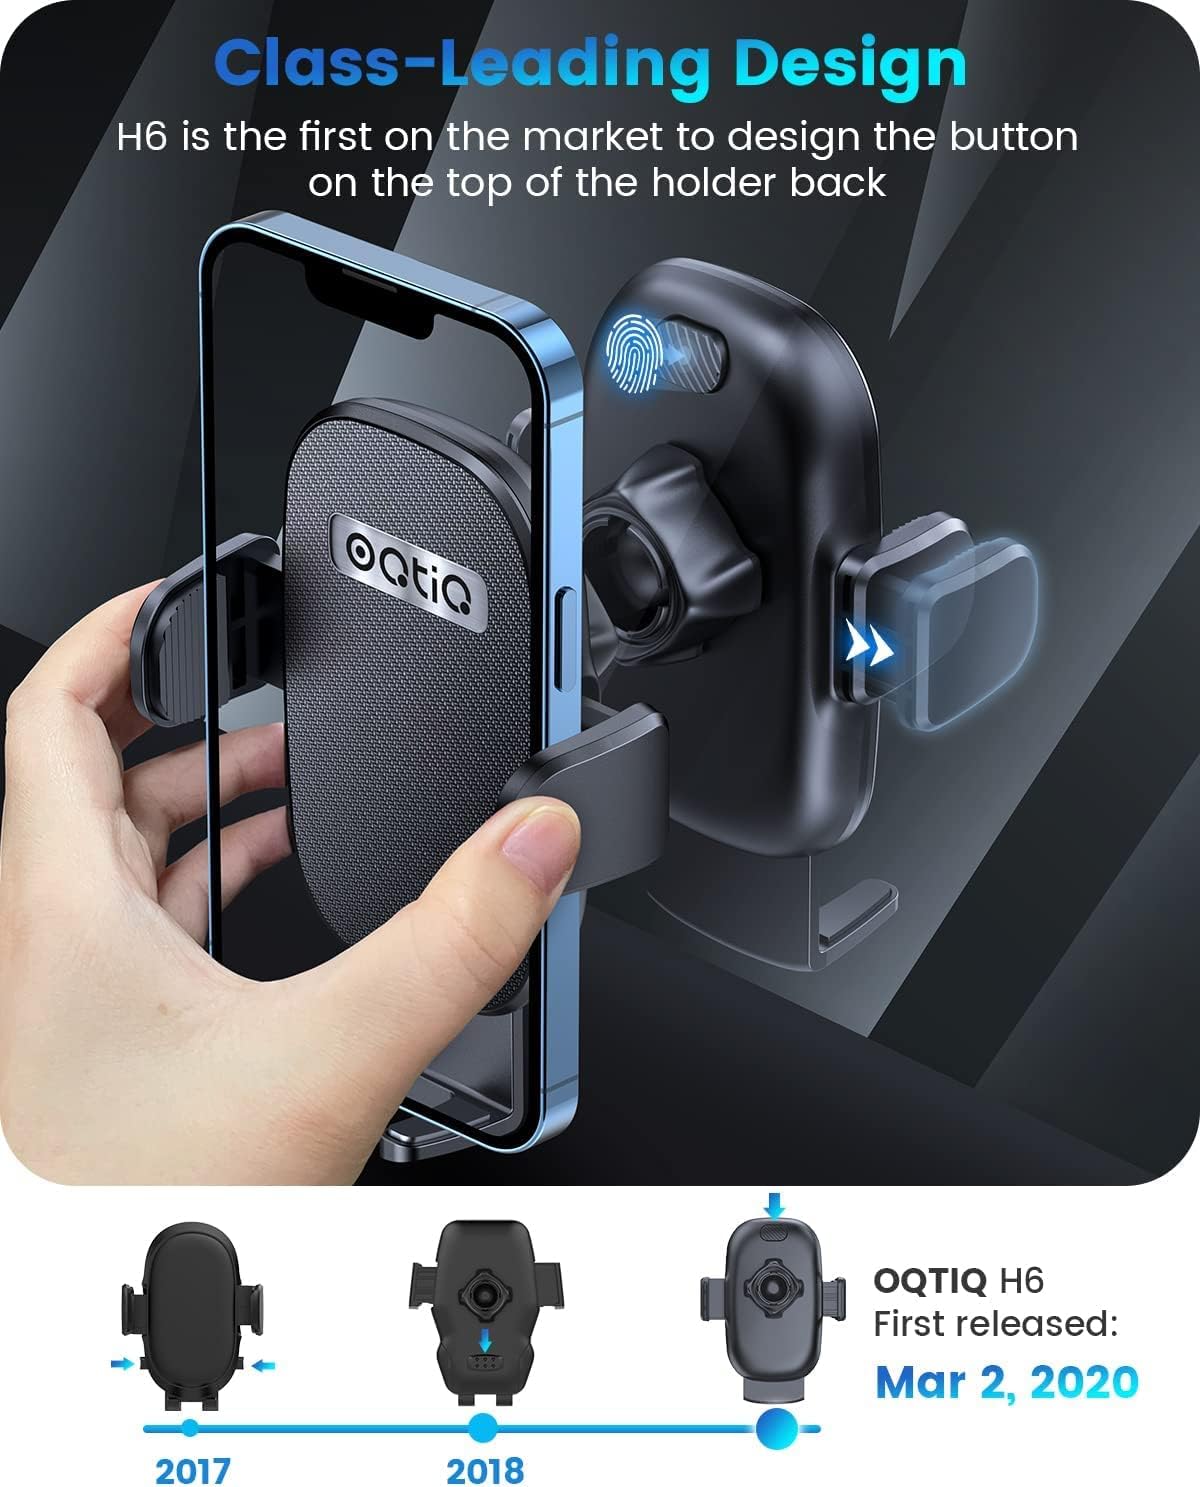 3-in-1 Suction Cup Phone Holder for Windshield/Dashboard/Air Vent with Strong Sticky Gel Pad, Compatible with iPhone, Samsung & Others